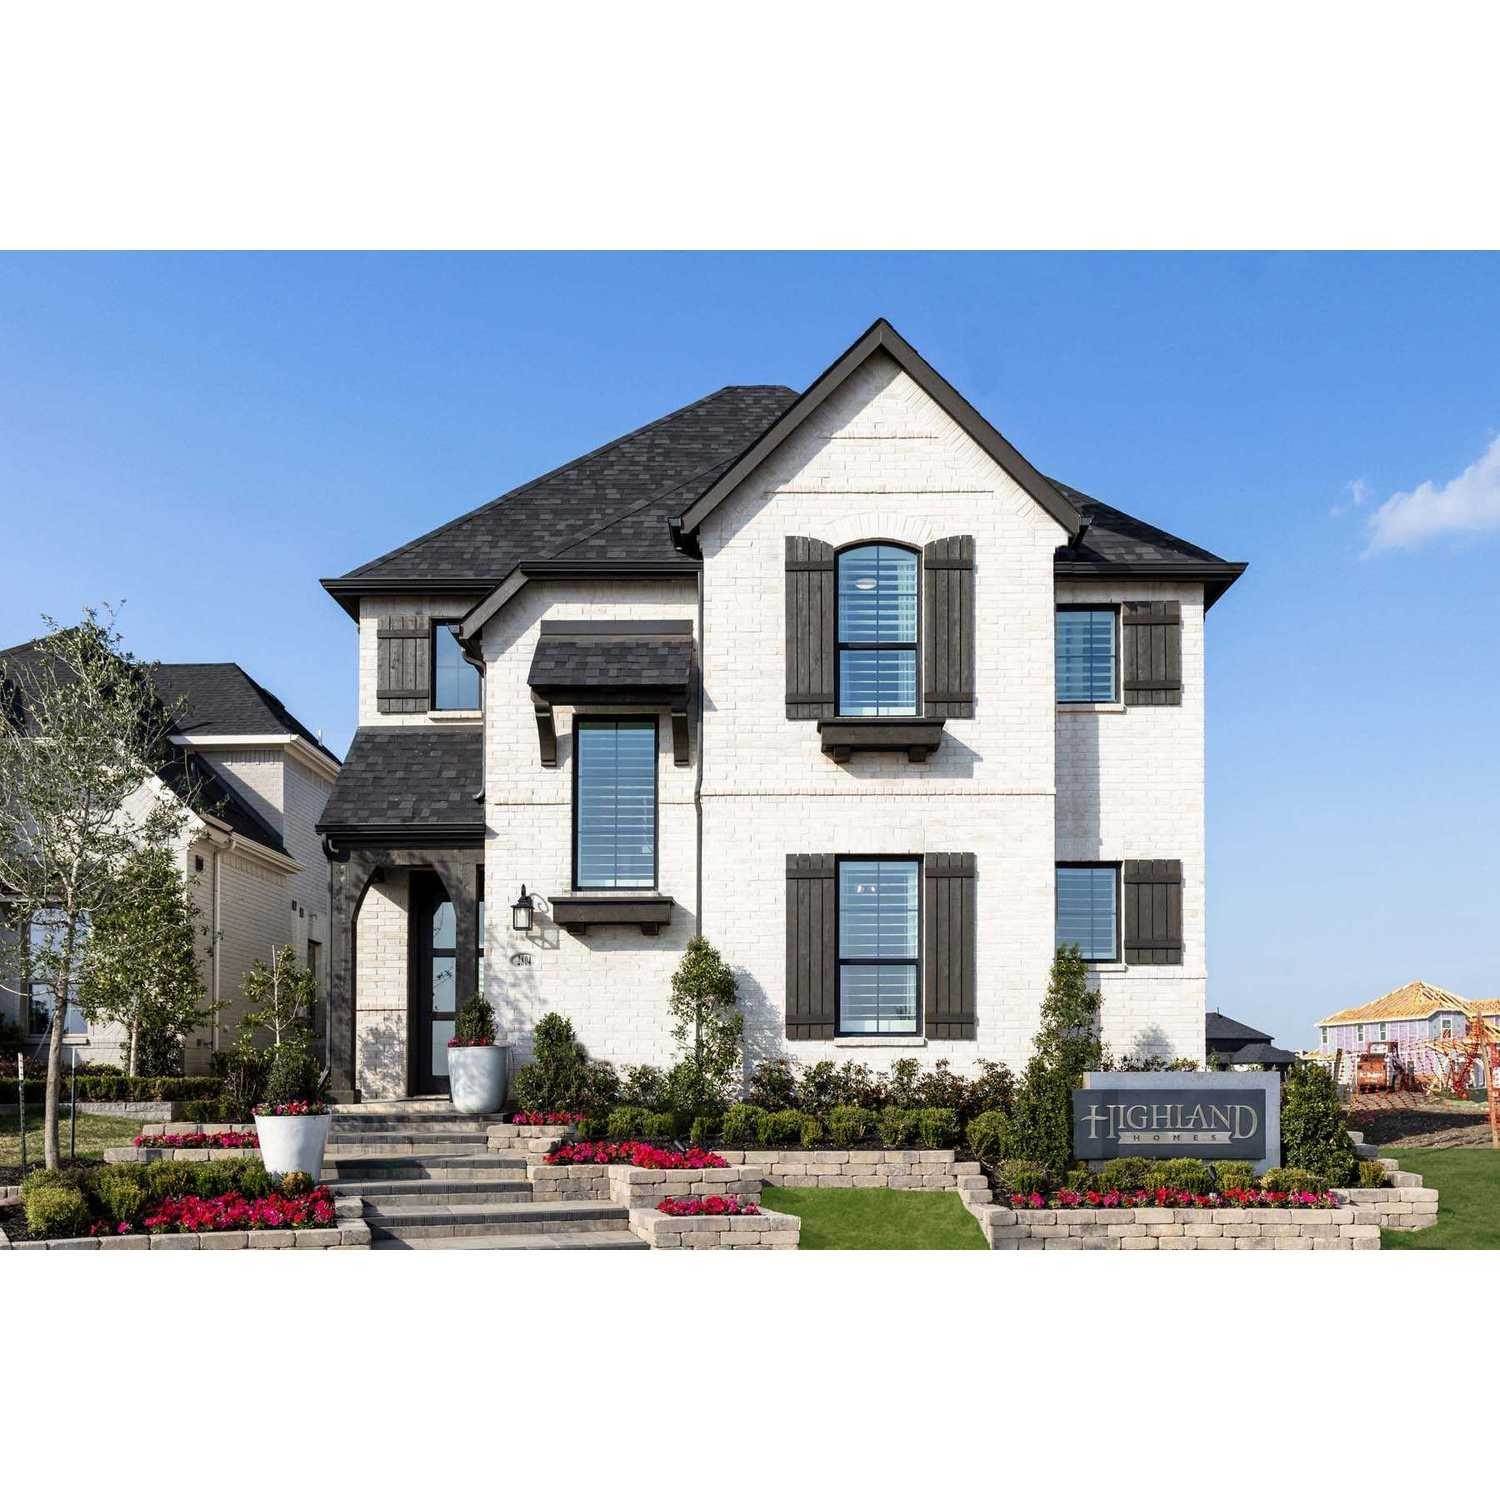 2. Cambridge Crossing 40ft. lots xây dựng tại 2237 Pinner Court, Frisco, TX 75035